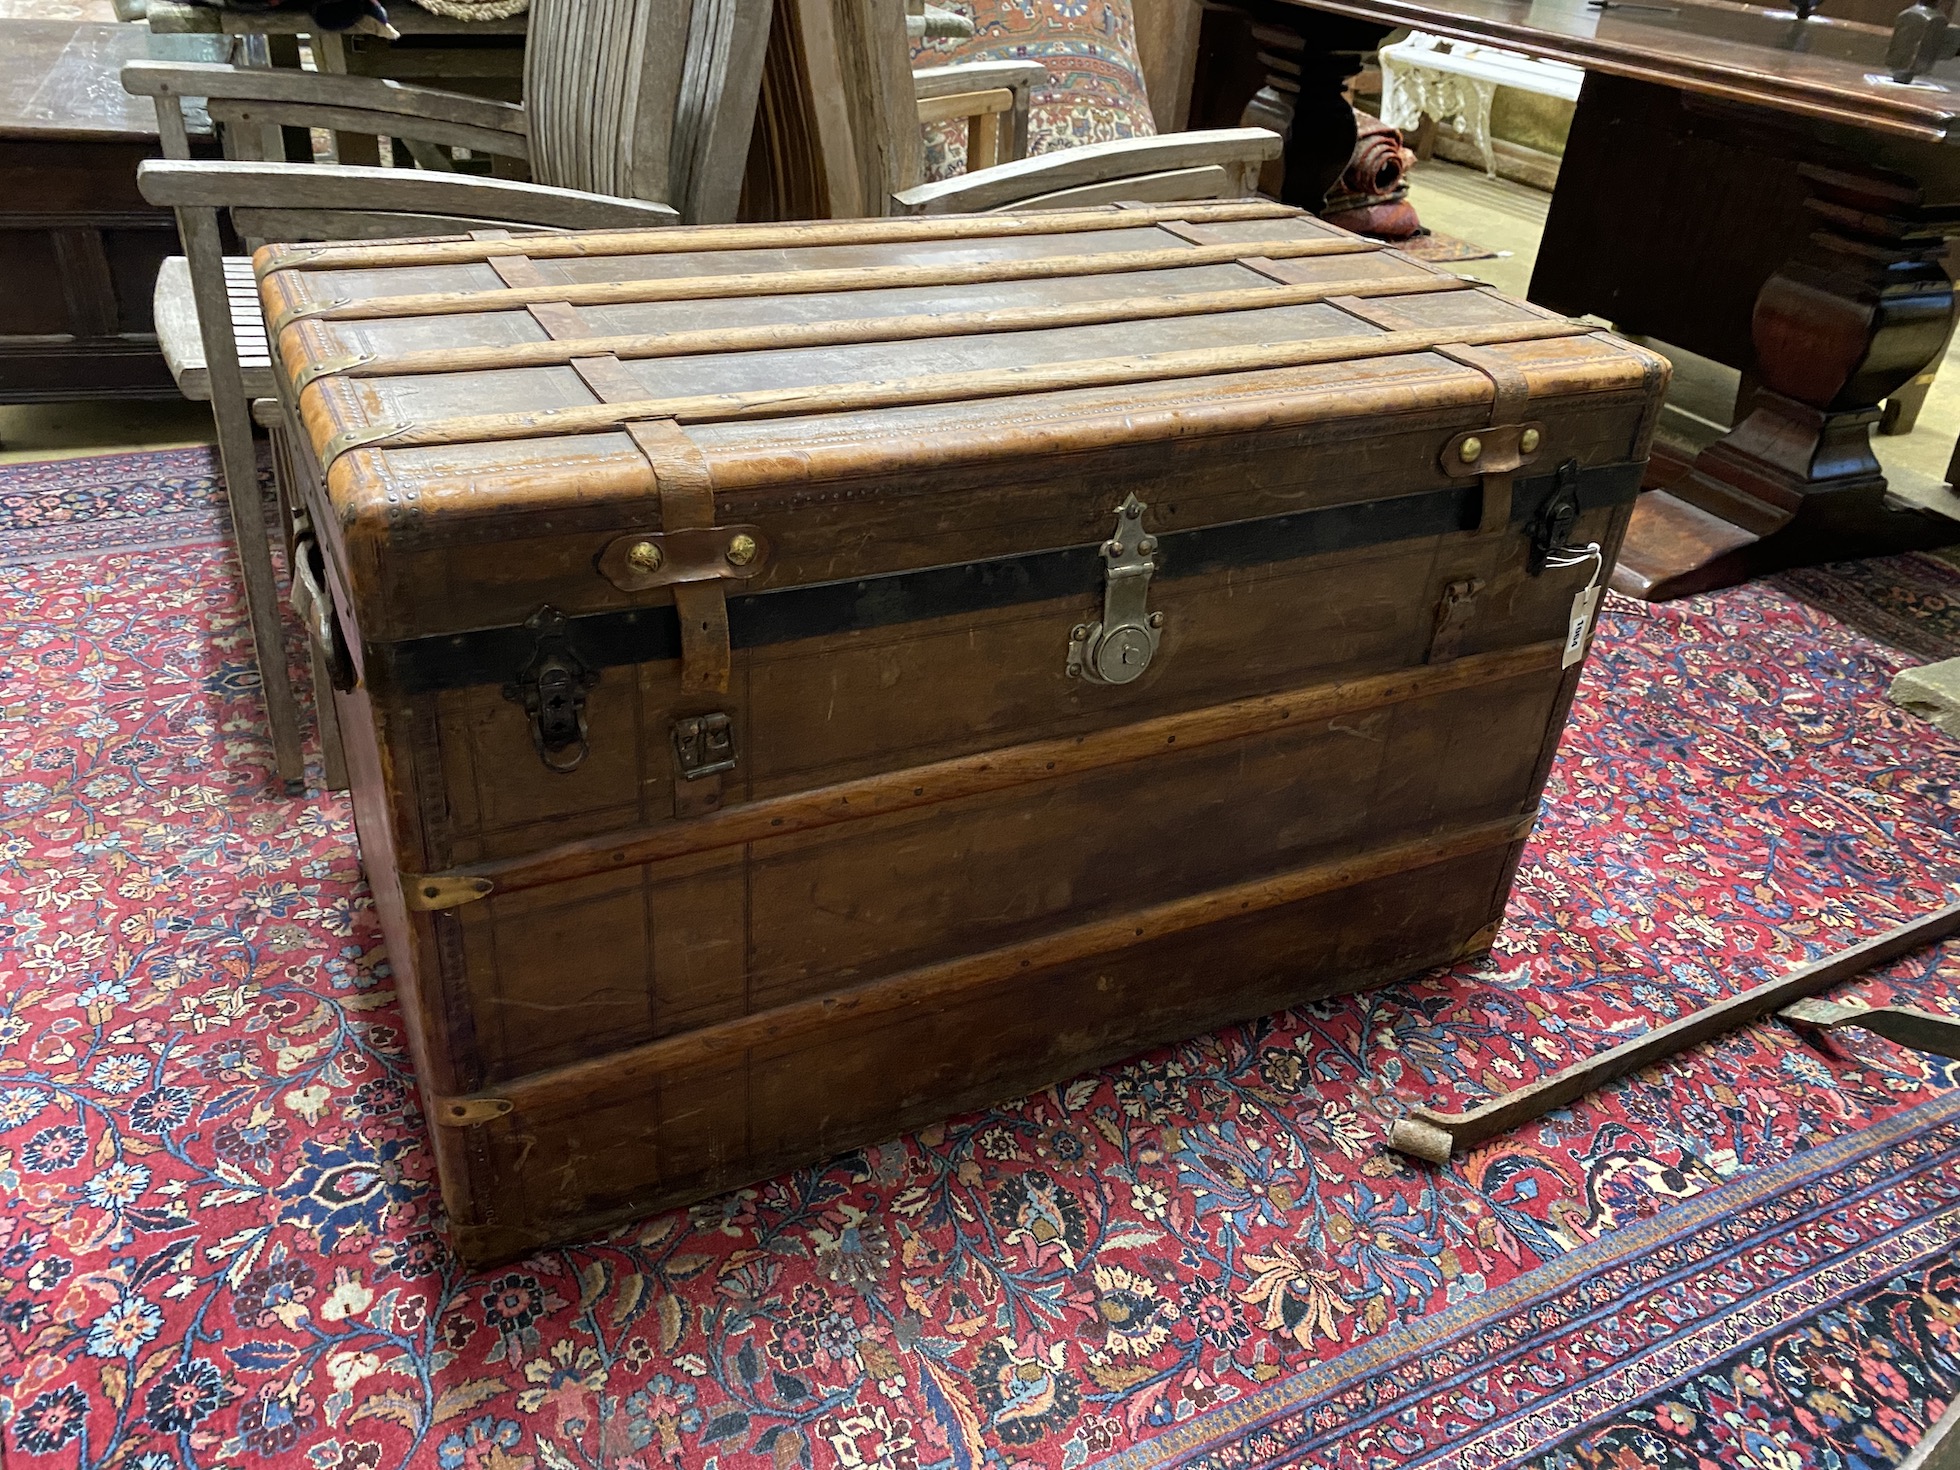 A late 19th century French travelling trunk with interior paper label “A. Bertrand, Paris”, length 106cm, width 60cm, height 66cm